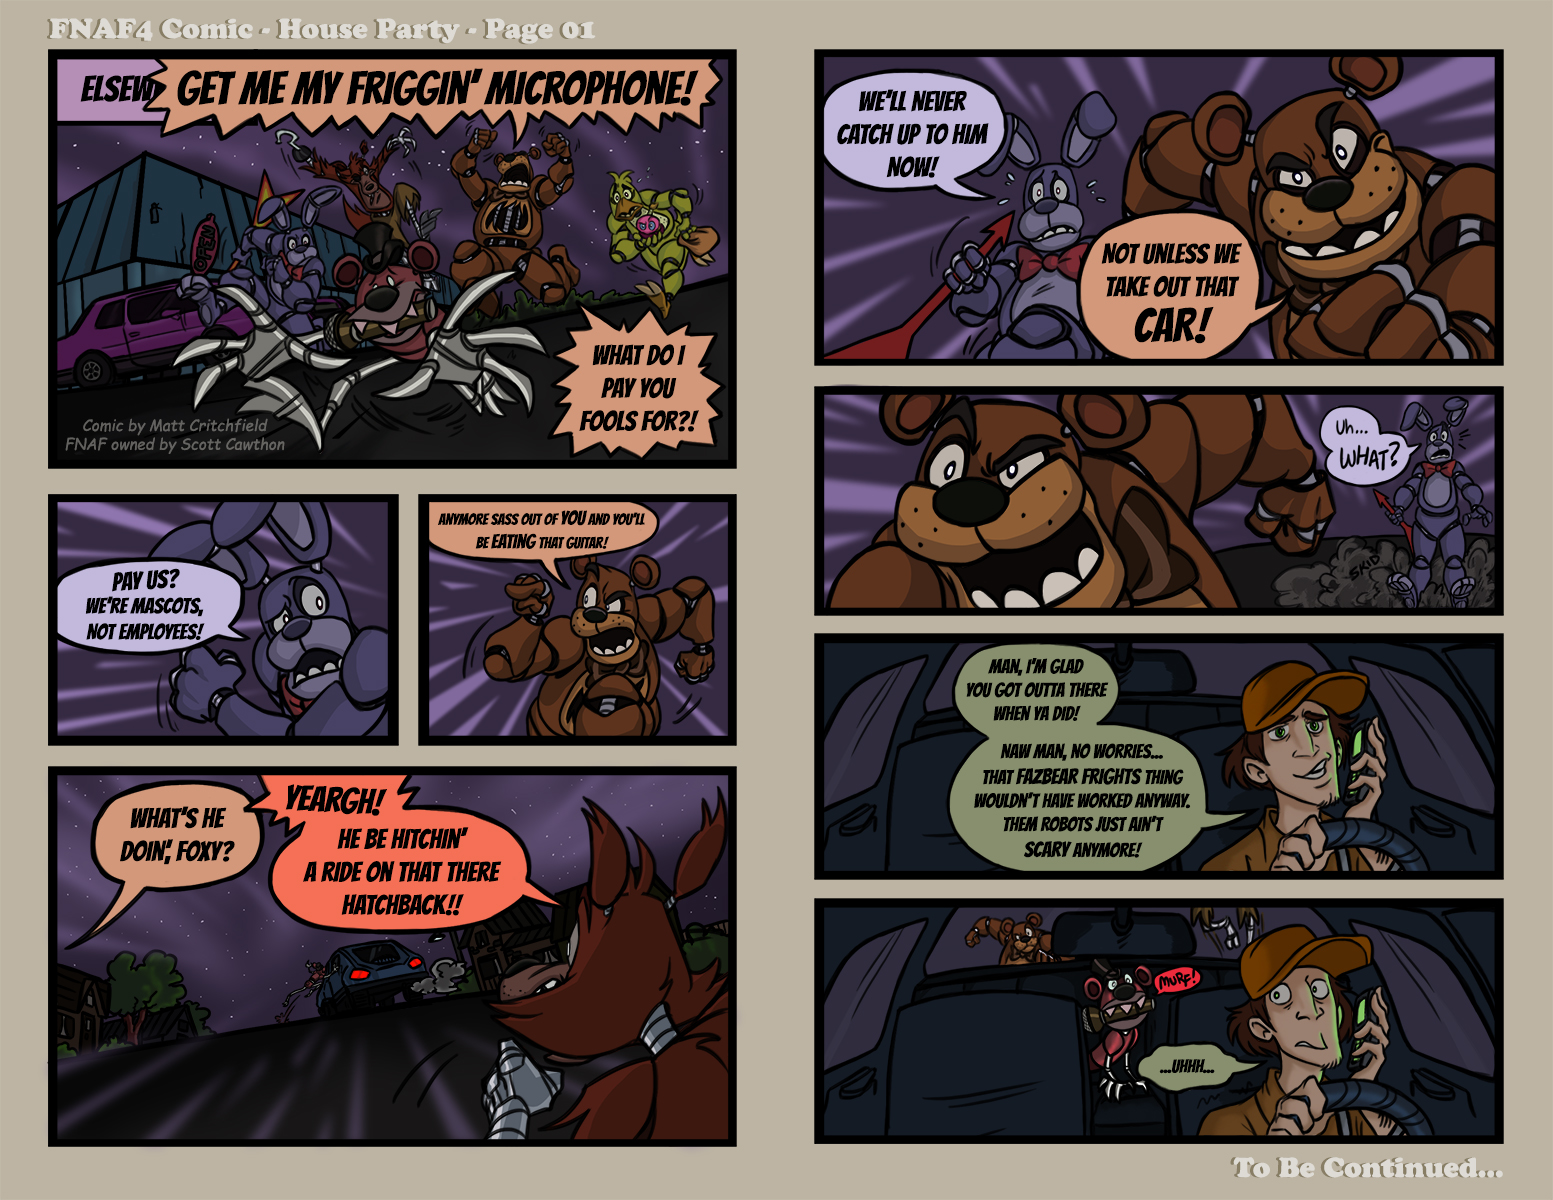 FNAF4 Comic - House Party - Page 01 - 1-28-16